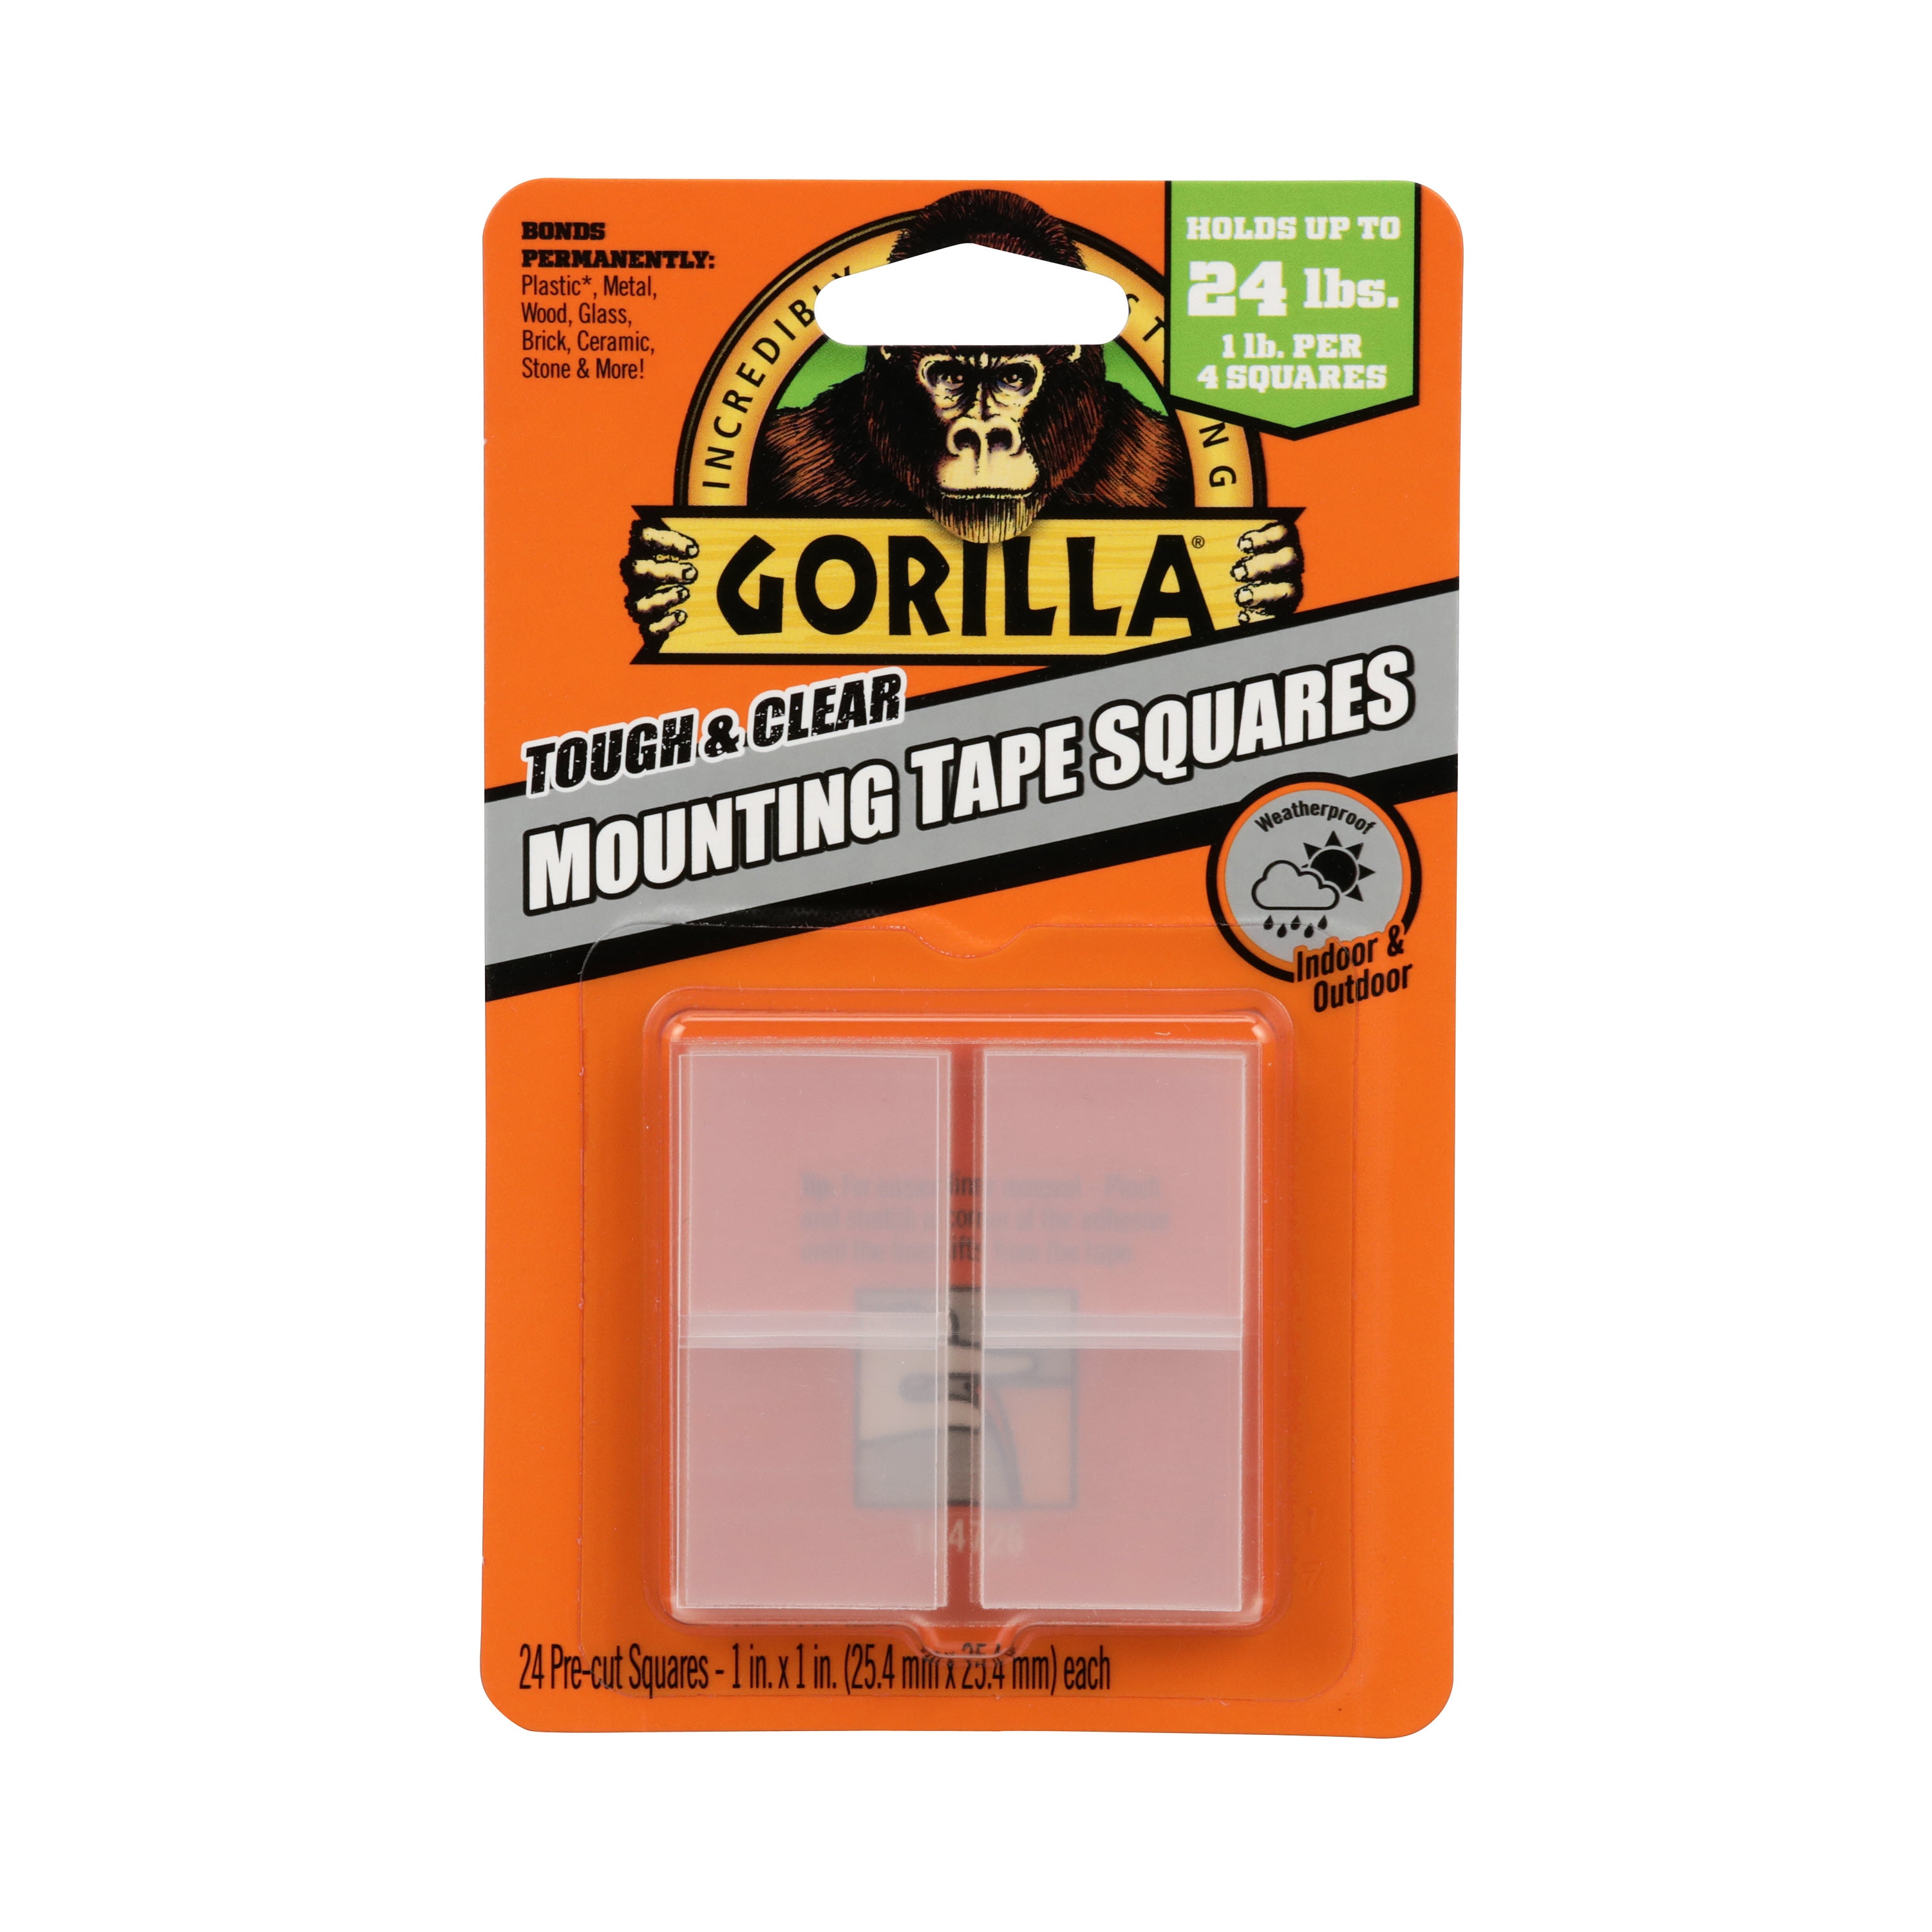 Gorilla Mounting Tabs Squares Double Sided Tape Sticky Pads Adhesive Clear 